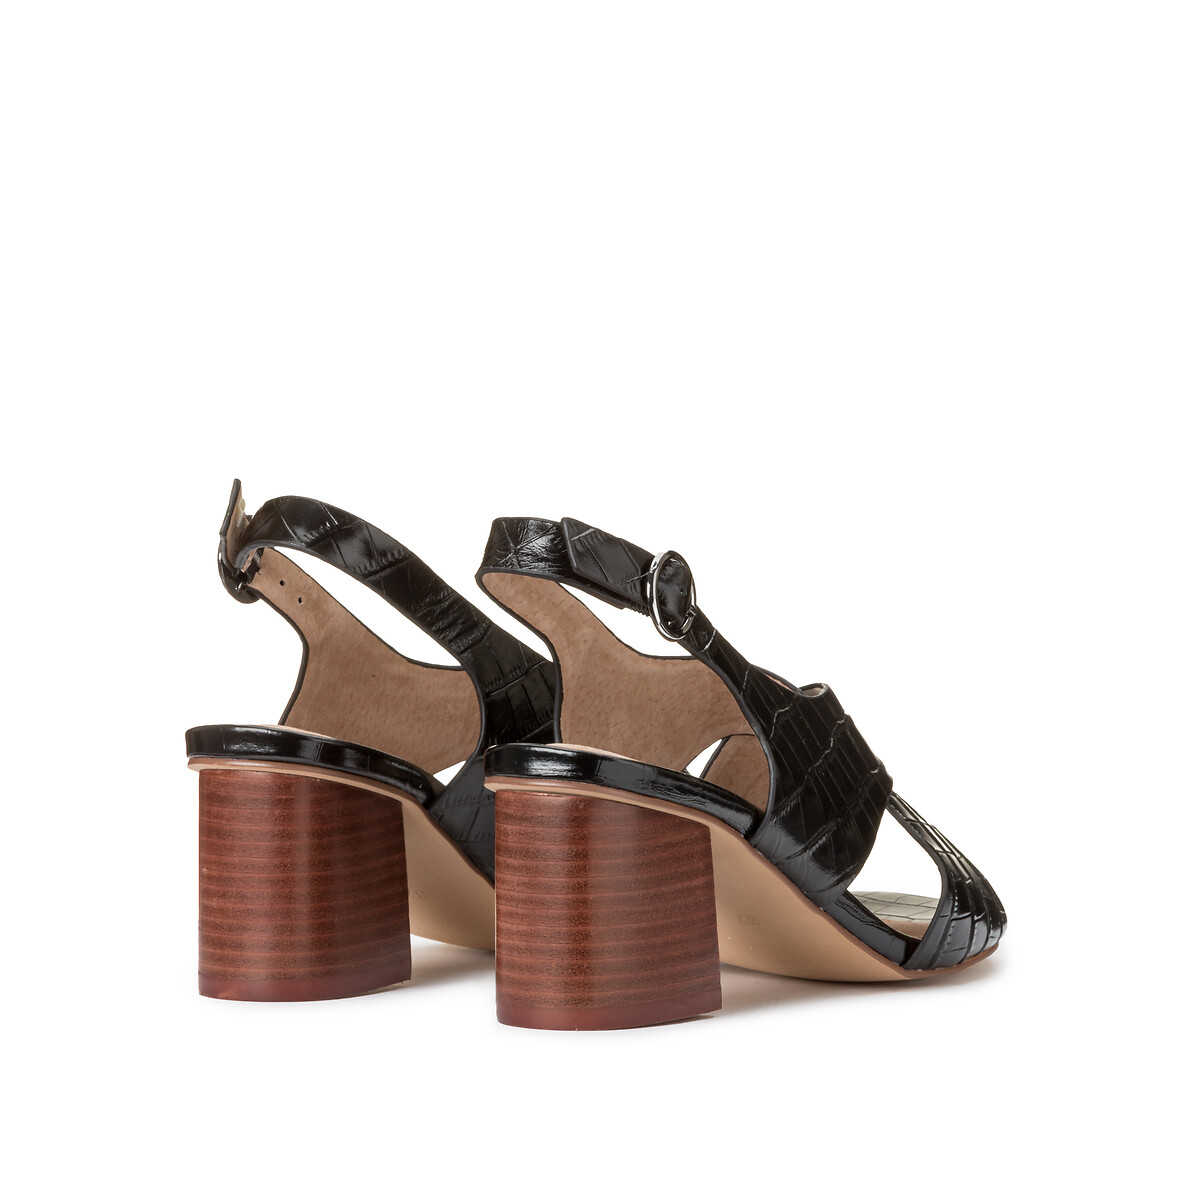 Mock Croc Leather Sandals with Crossover Straps